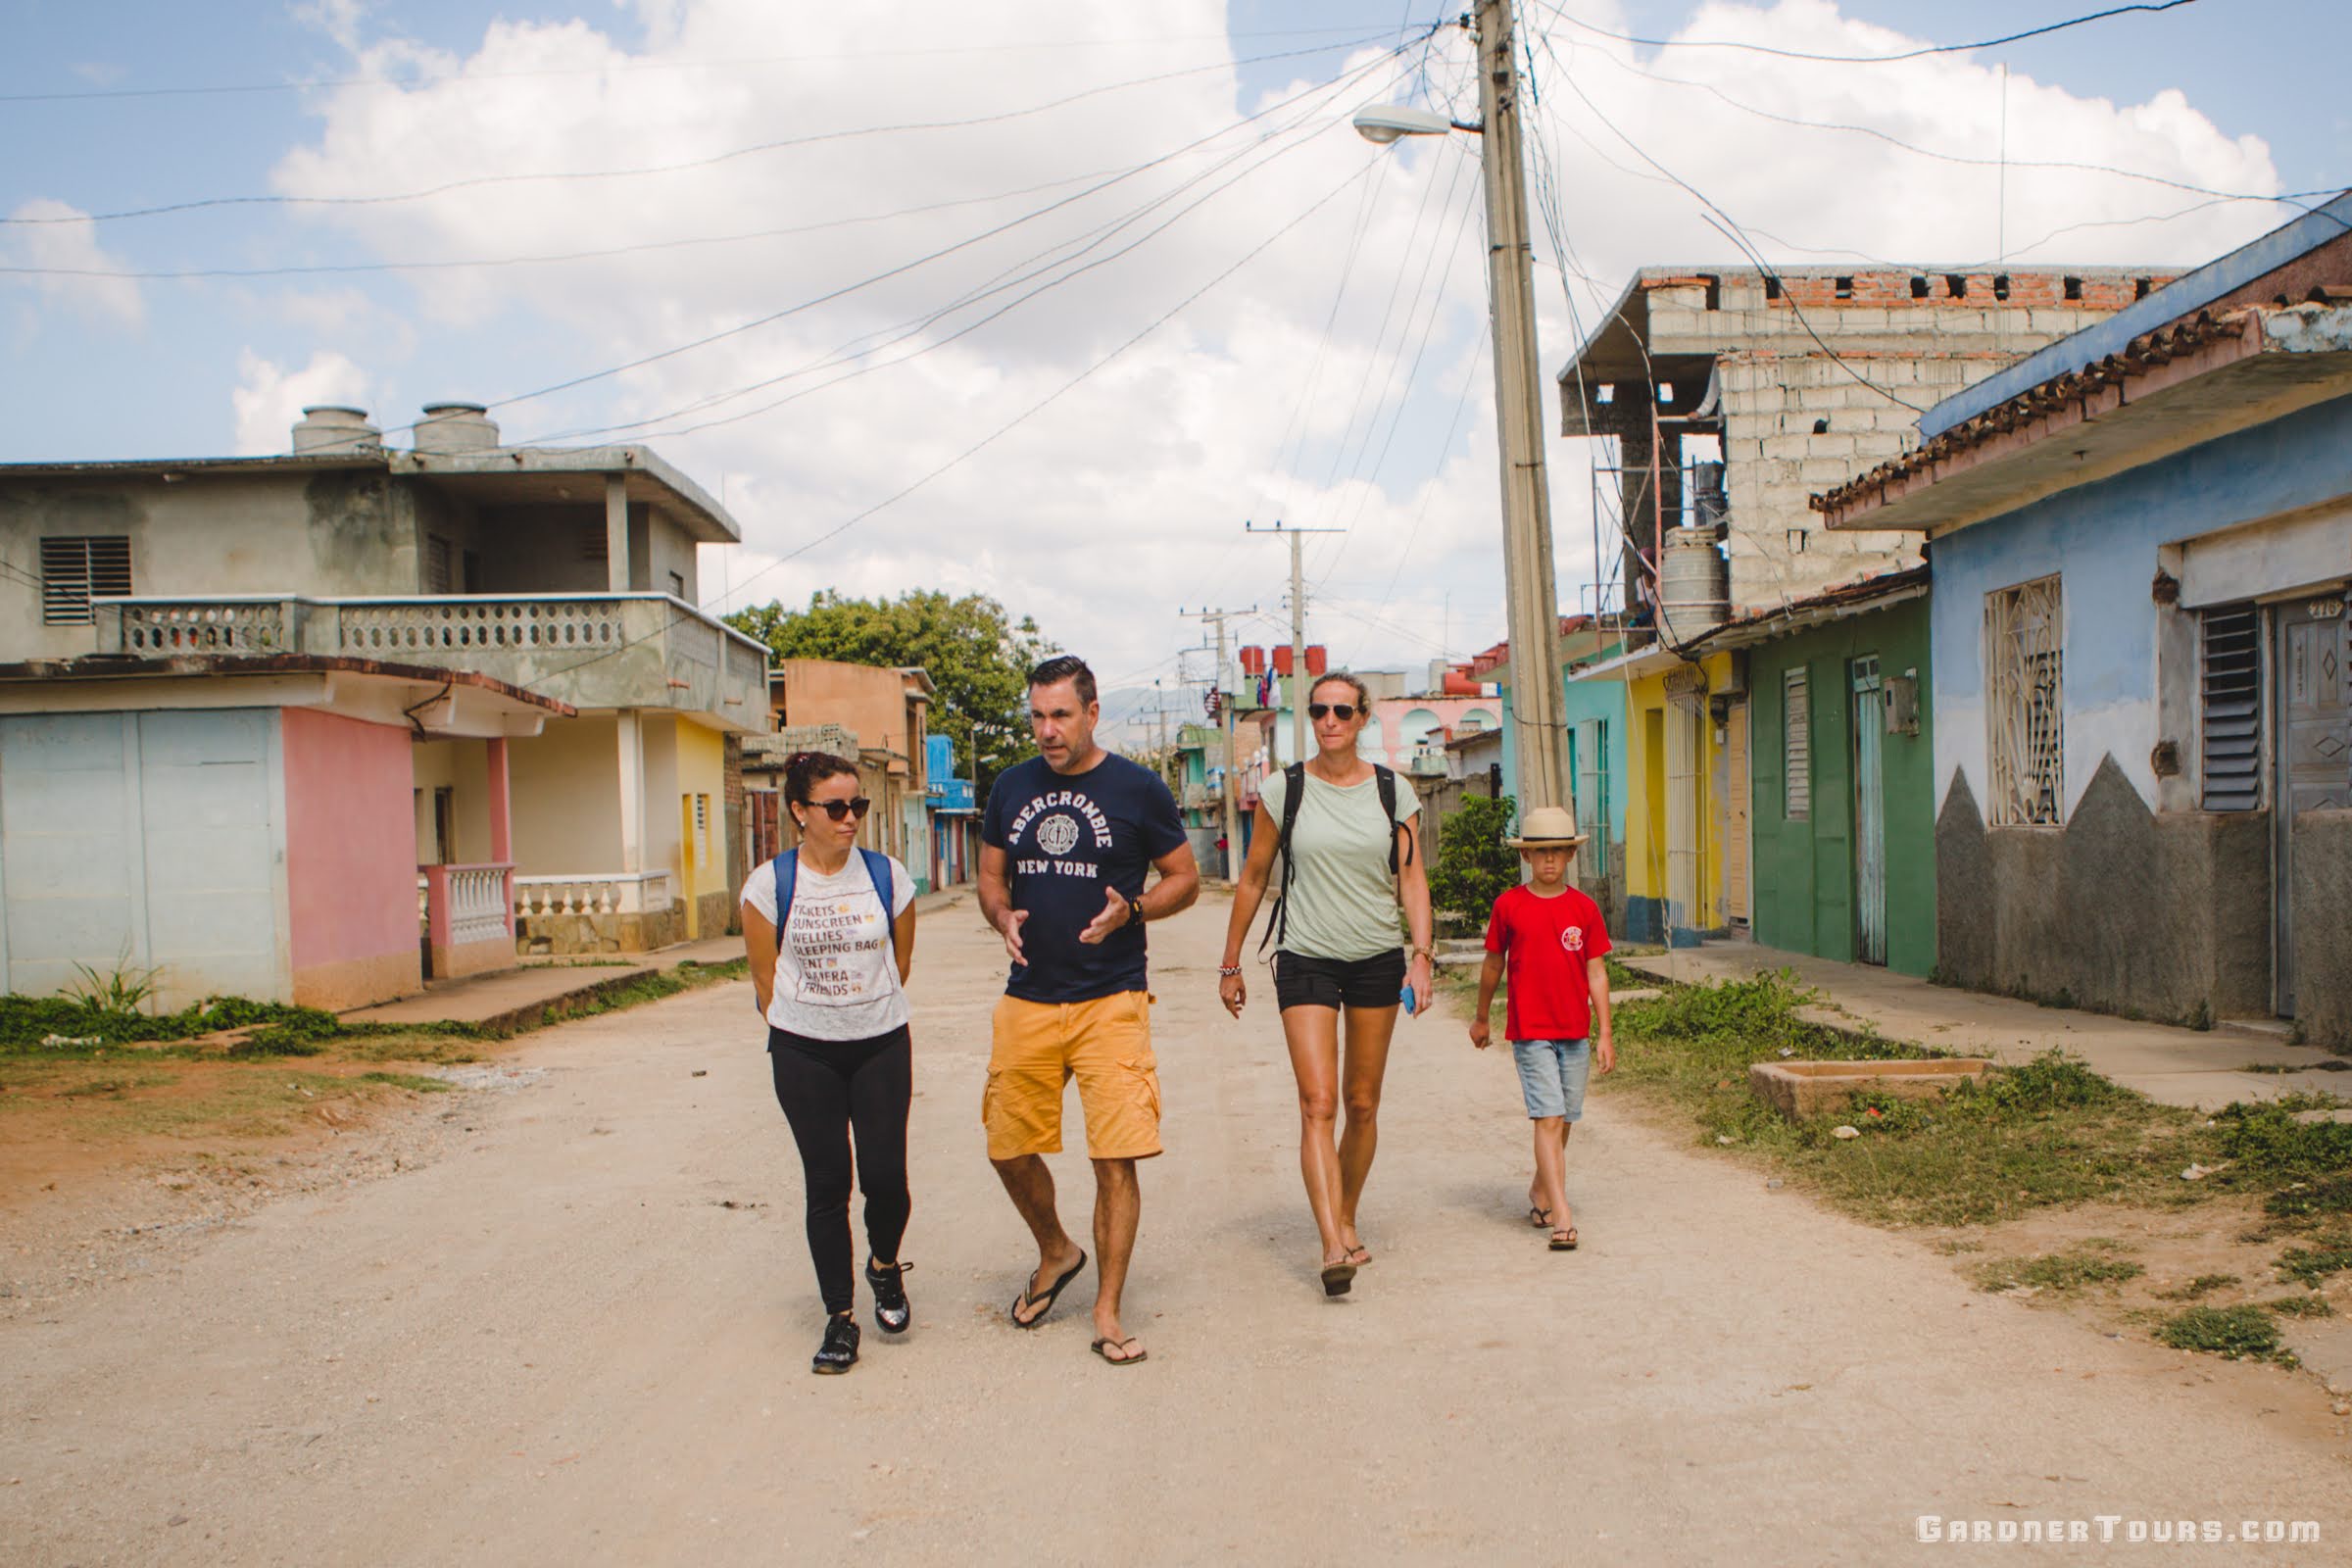 Gardner Tours Cuban Tour Guide Zeydi Walking the Streets of Trinidad Cuba with her travelers from Holland